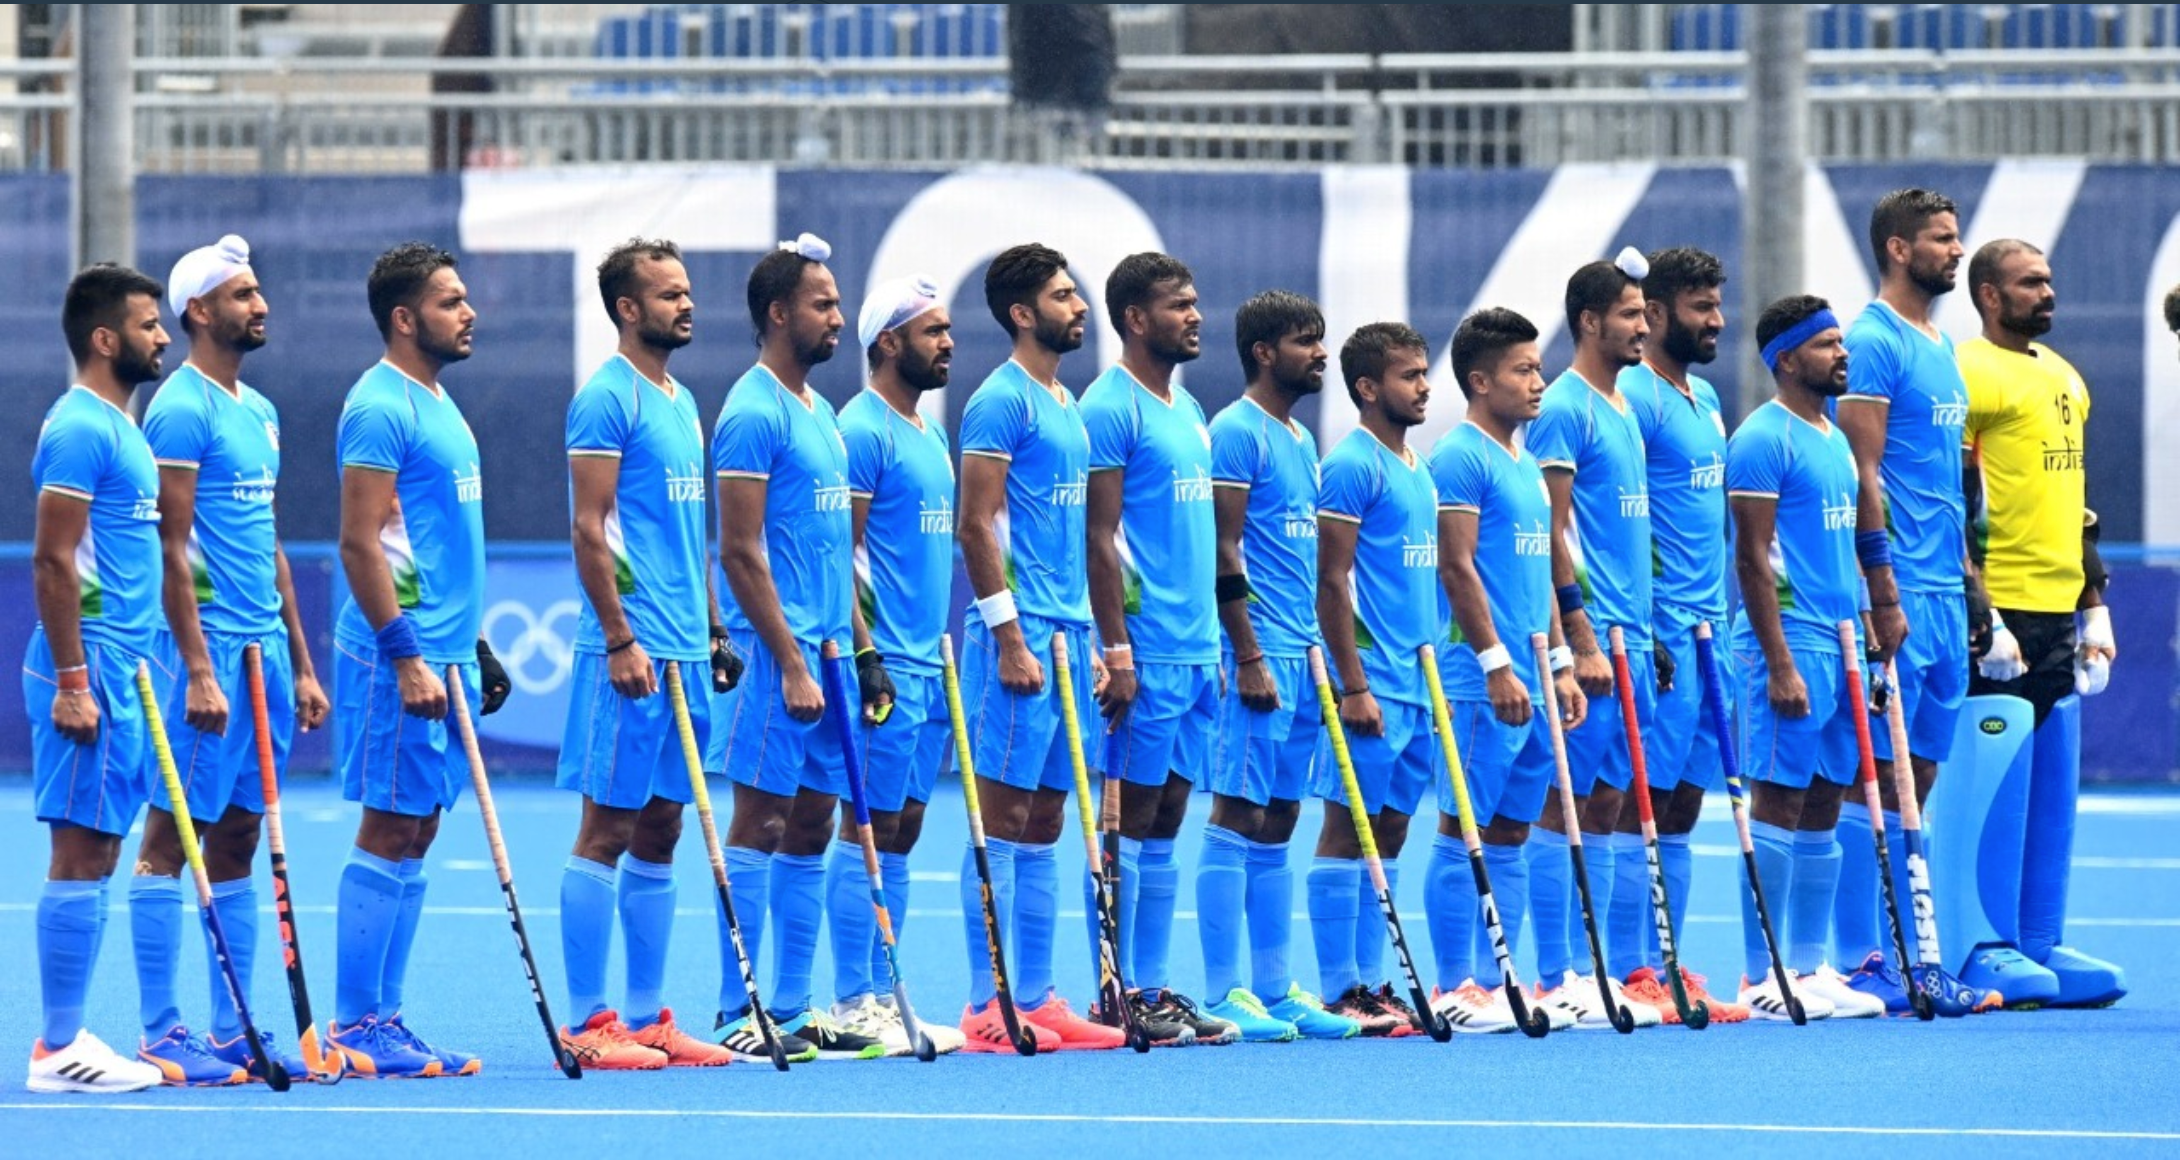 A real 'Chak De' moment for Indian hockey: Men's team wins Olympic medal after 41 years